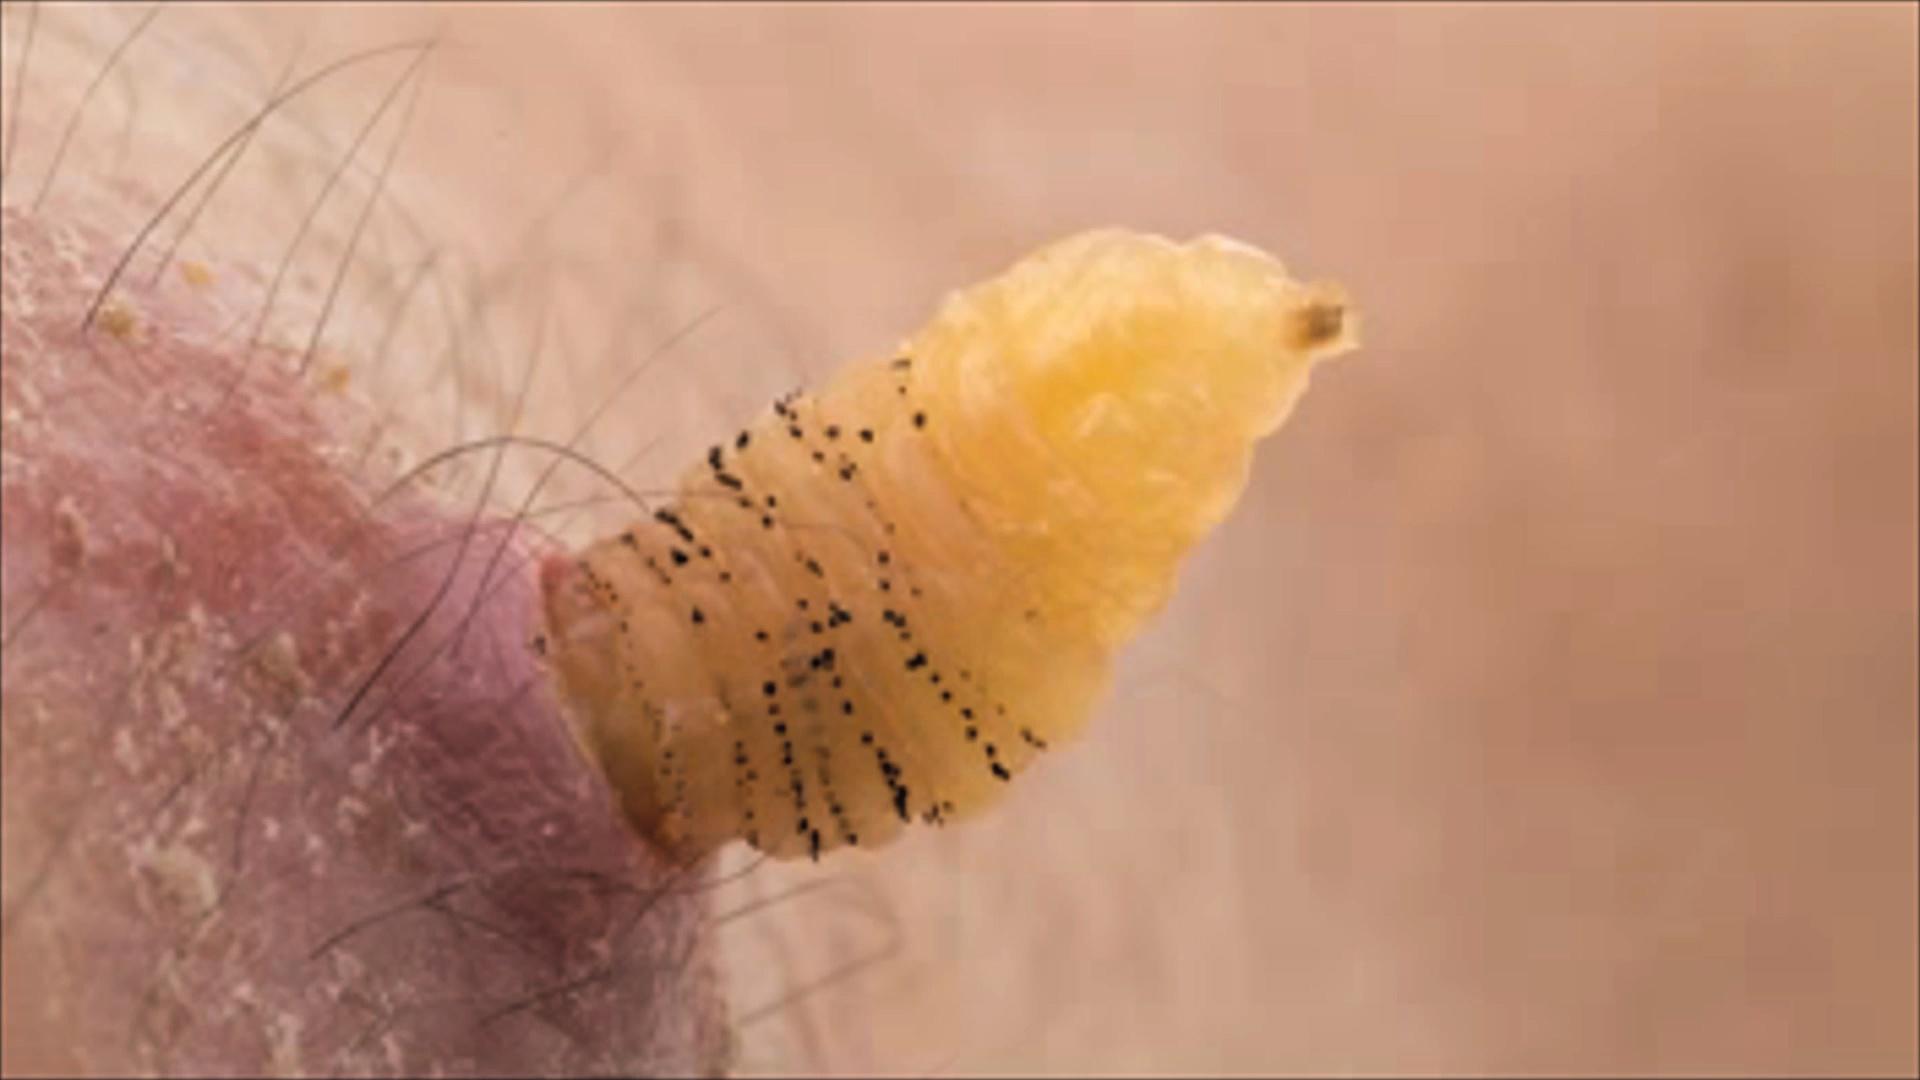 Here's another great closeup demonstrating the wonders of nature - the birth of a human bot fly. Bot flies reproduce by laying eggs inside the skin of living creatures, in this case humans. The eggs hatch and the larva eats its way back out of your skin to find freedom and begin the cycle anew.